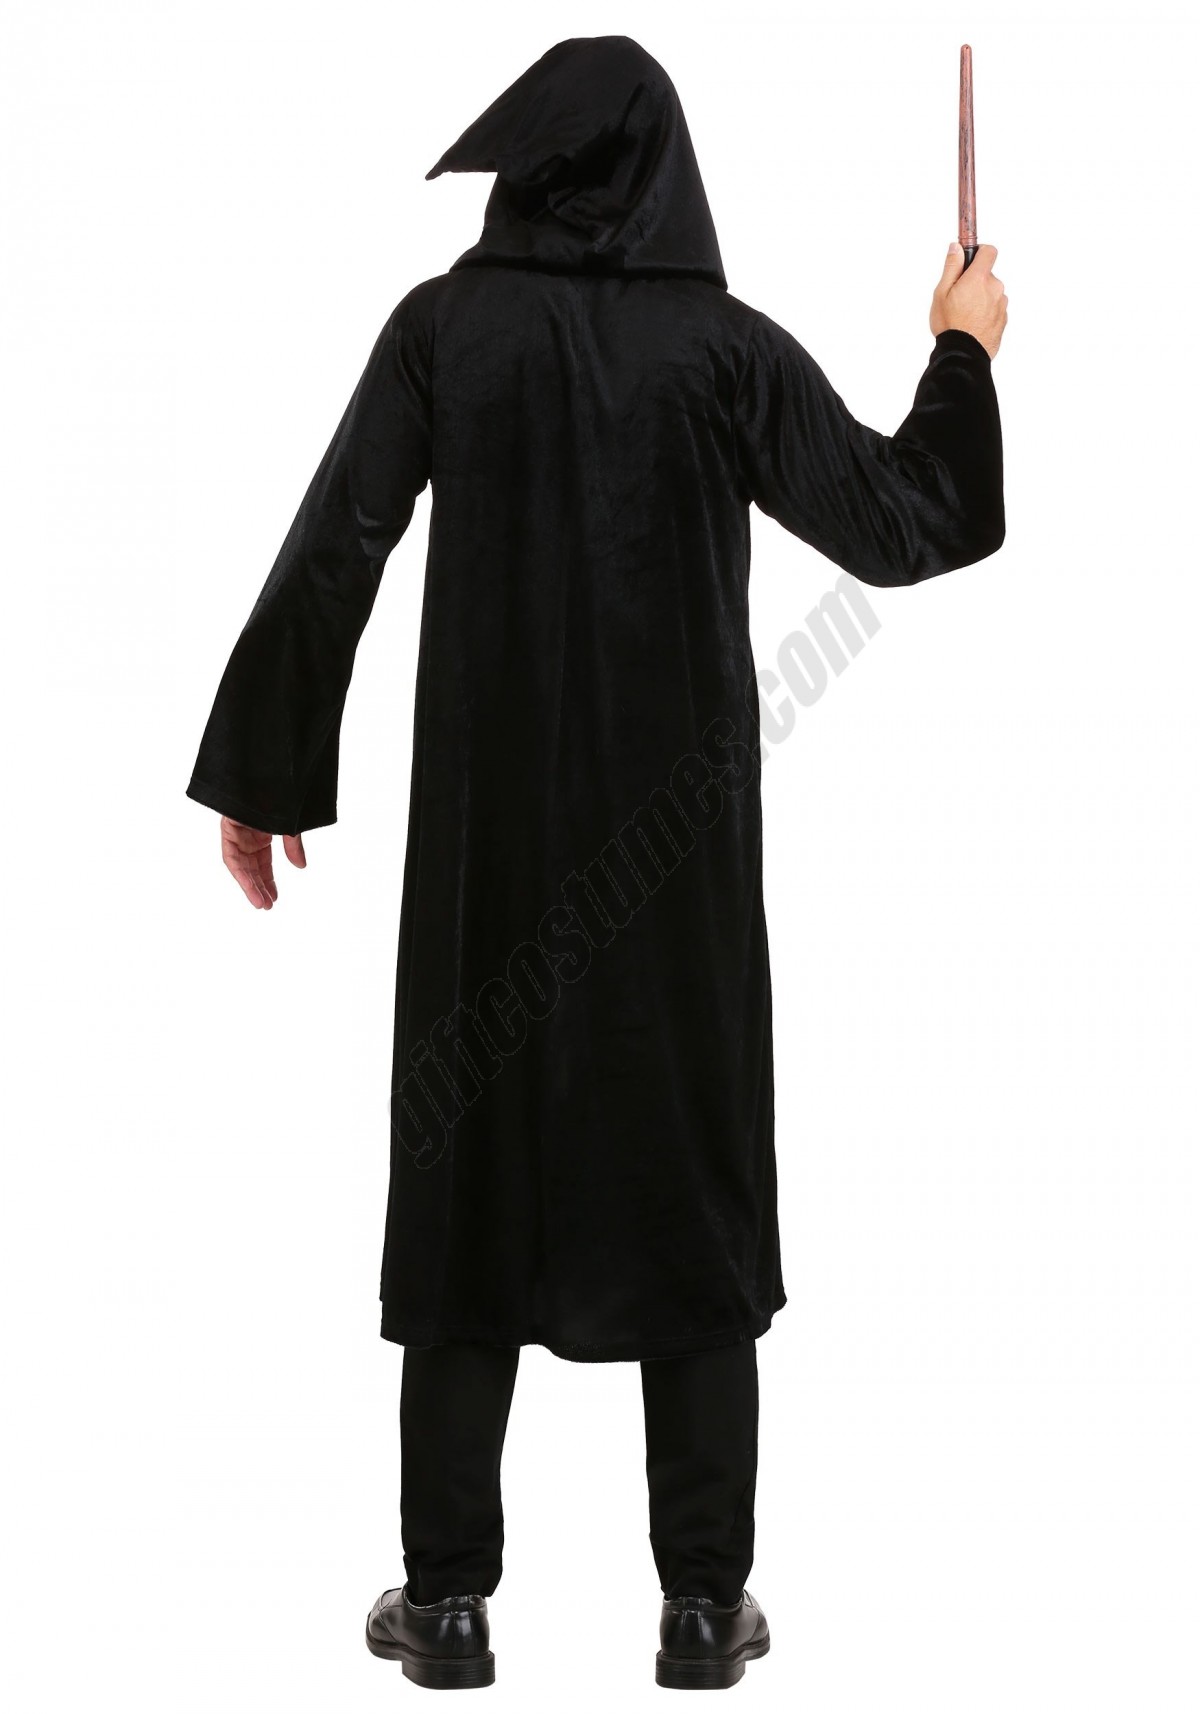 Harry Potter Deluxe Slytherin Robe Costume for Adults - Men's - -4